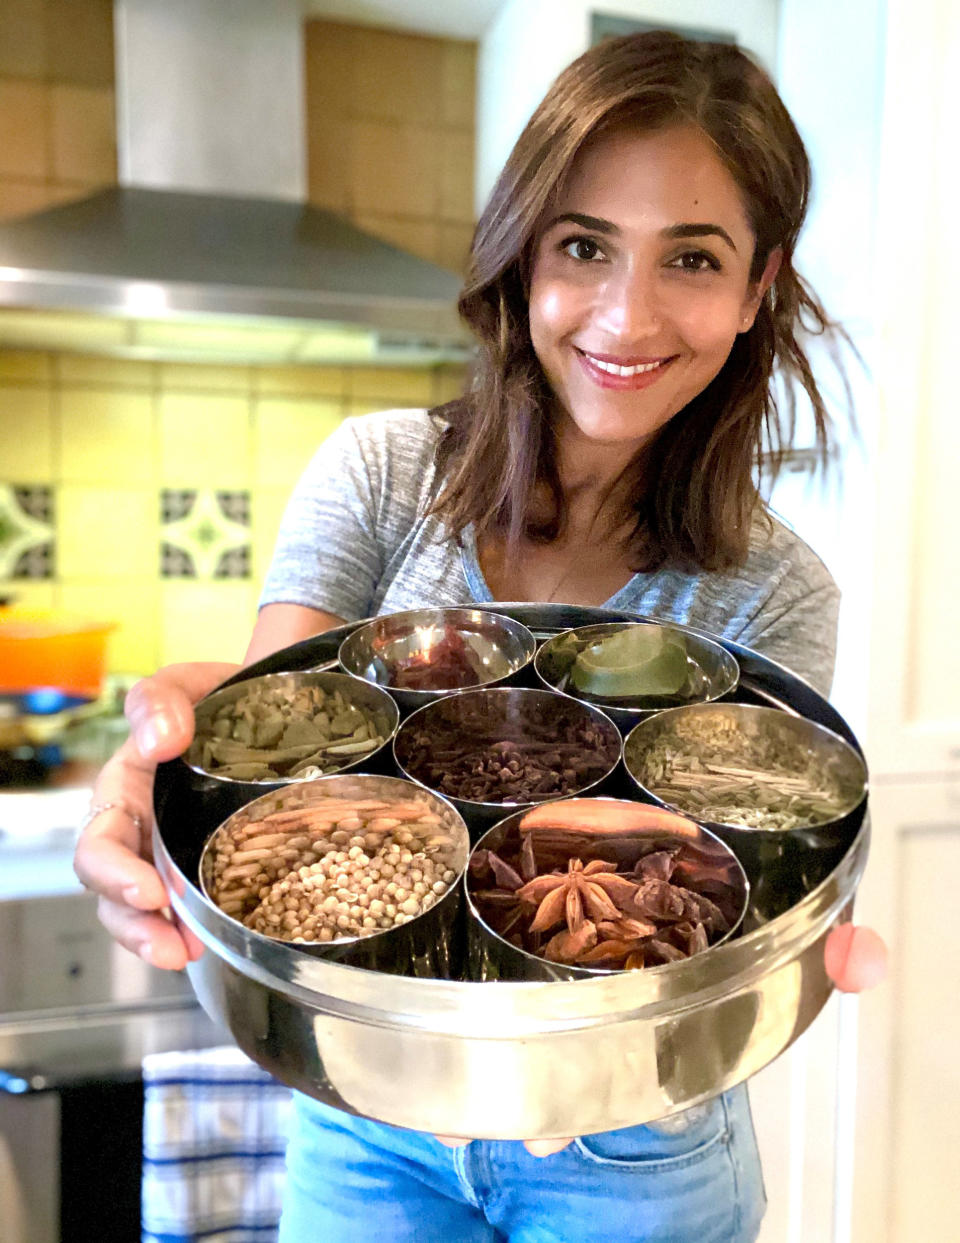 Kanchan Koya is the founder of the food blog Spice Spice Baby, which highlights the science-based benefits of ancient spices. (Courtesy Kanchan Koya)